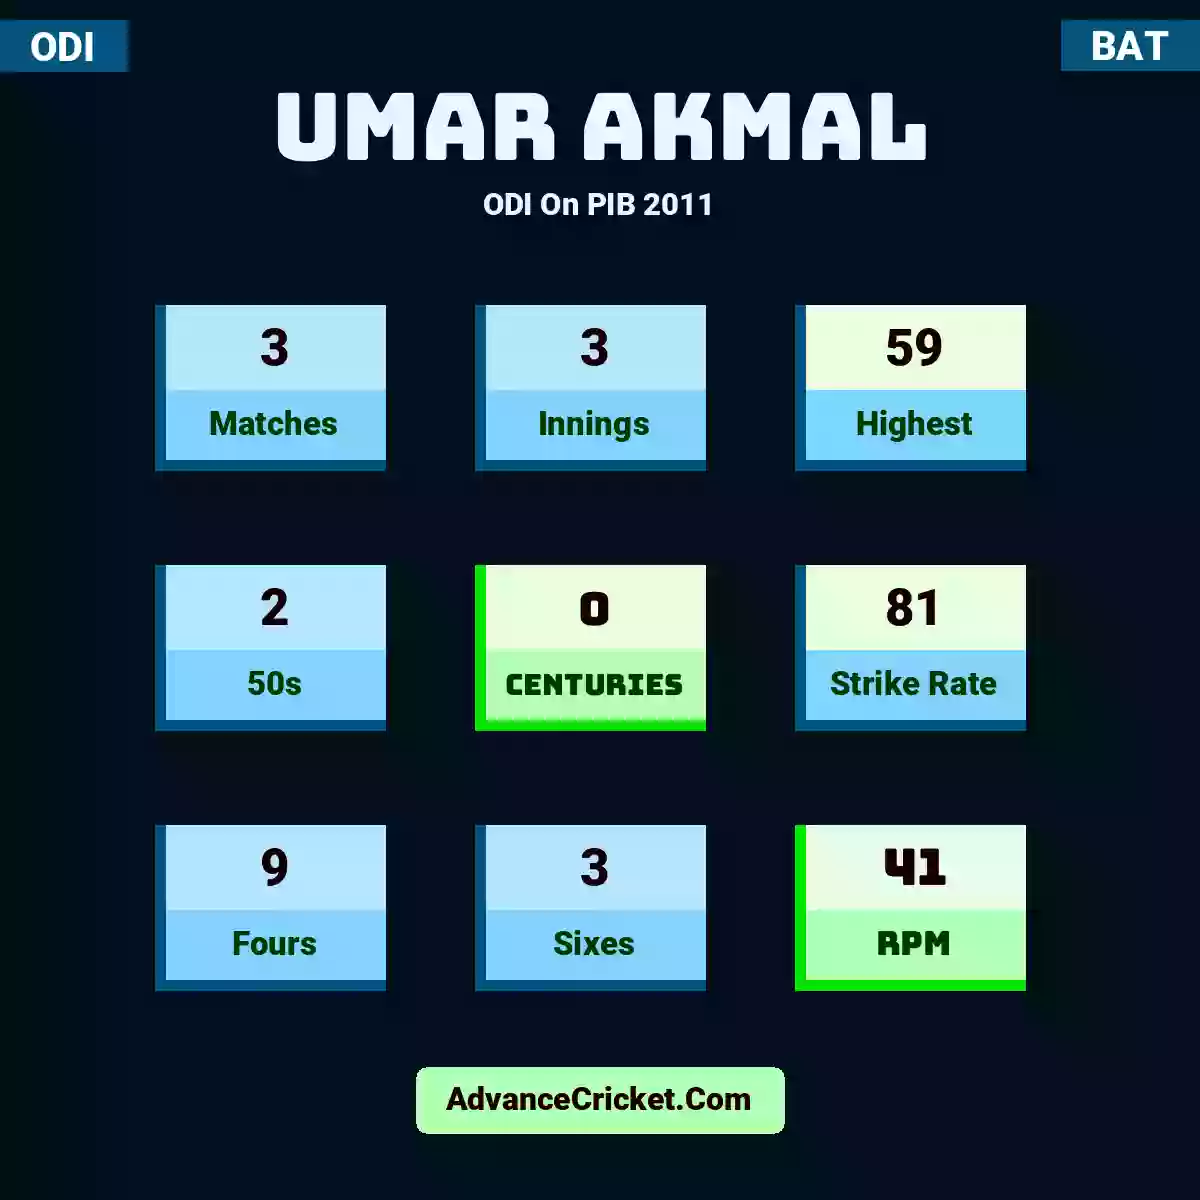 Umar Akmal ODI  On PIB 2011, Umar Akmal played 3 matches, scored 59 runs as highest, 2 half-centuries, and 0 centuries, with a strike rate of 81. U.Akmal hit 9 fours and 3 sixes, with an RPM of 41.